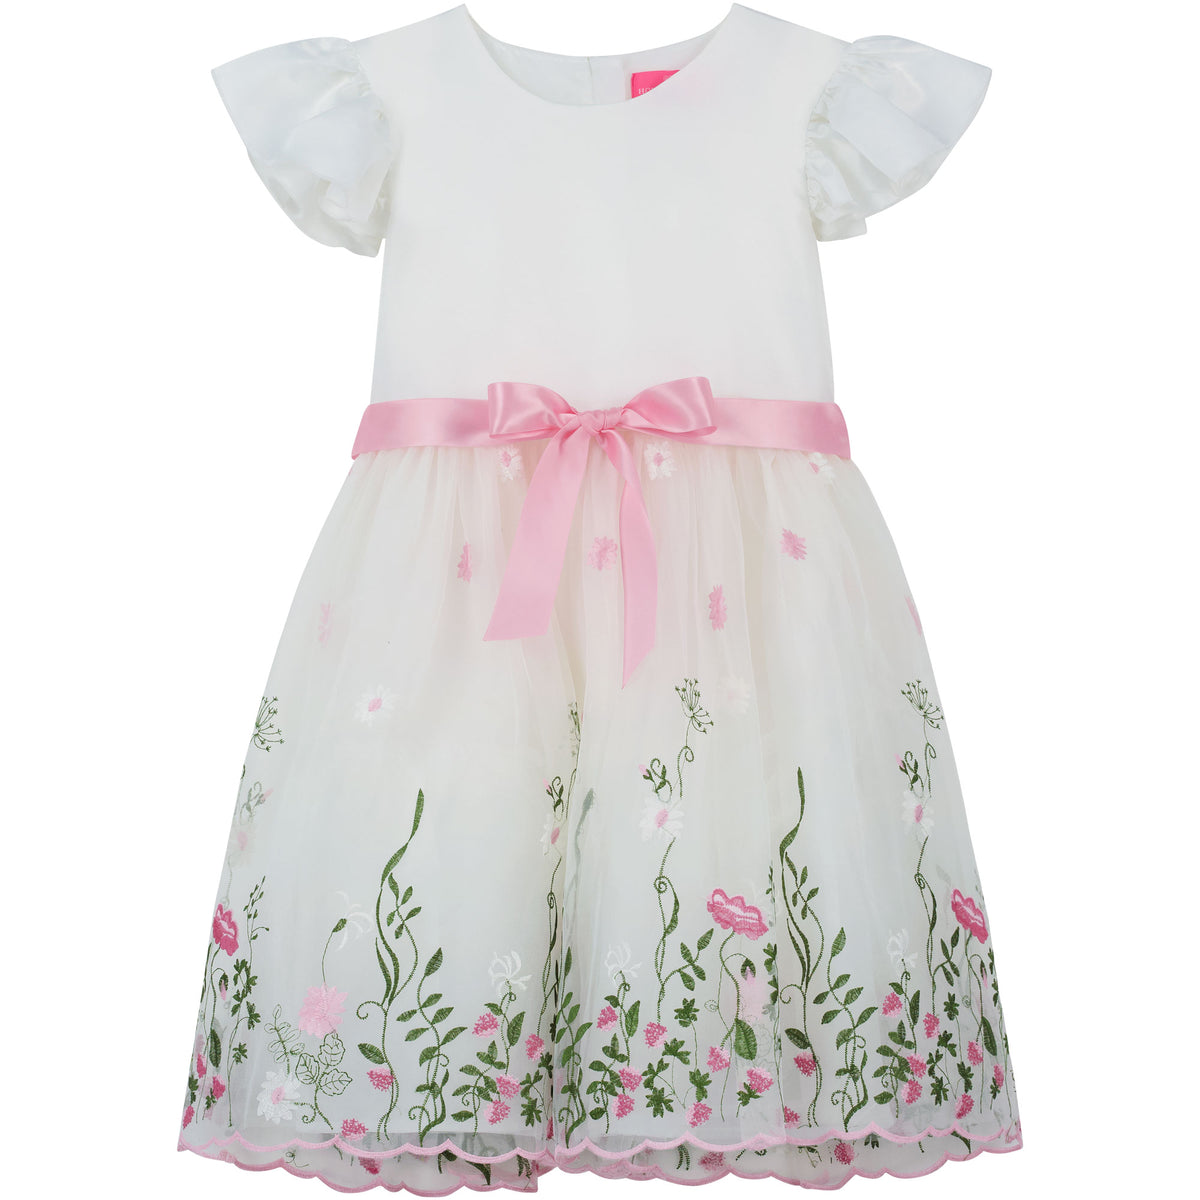 Garden Floral Girls Party Dress, White & Pink | Holly Hastie London